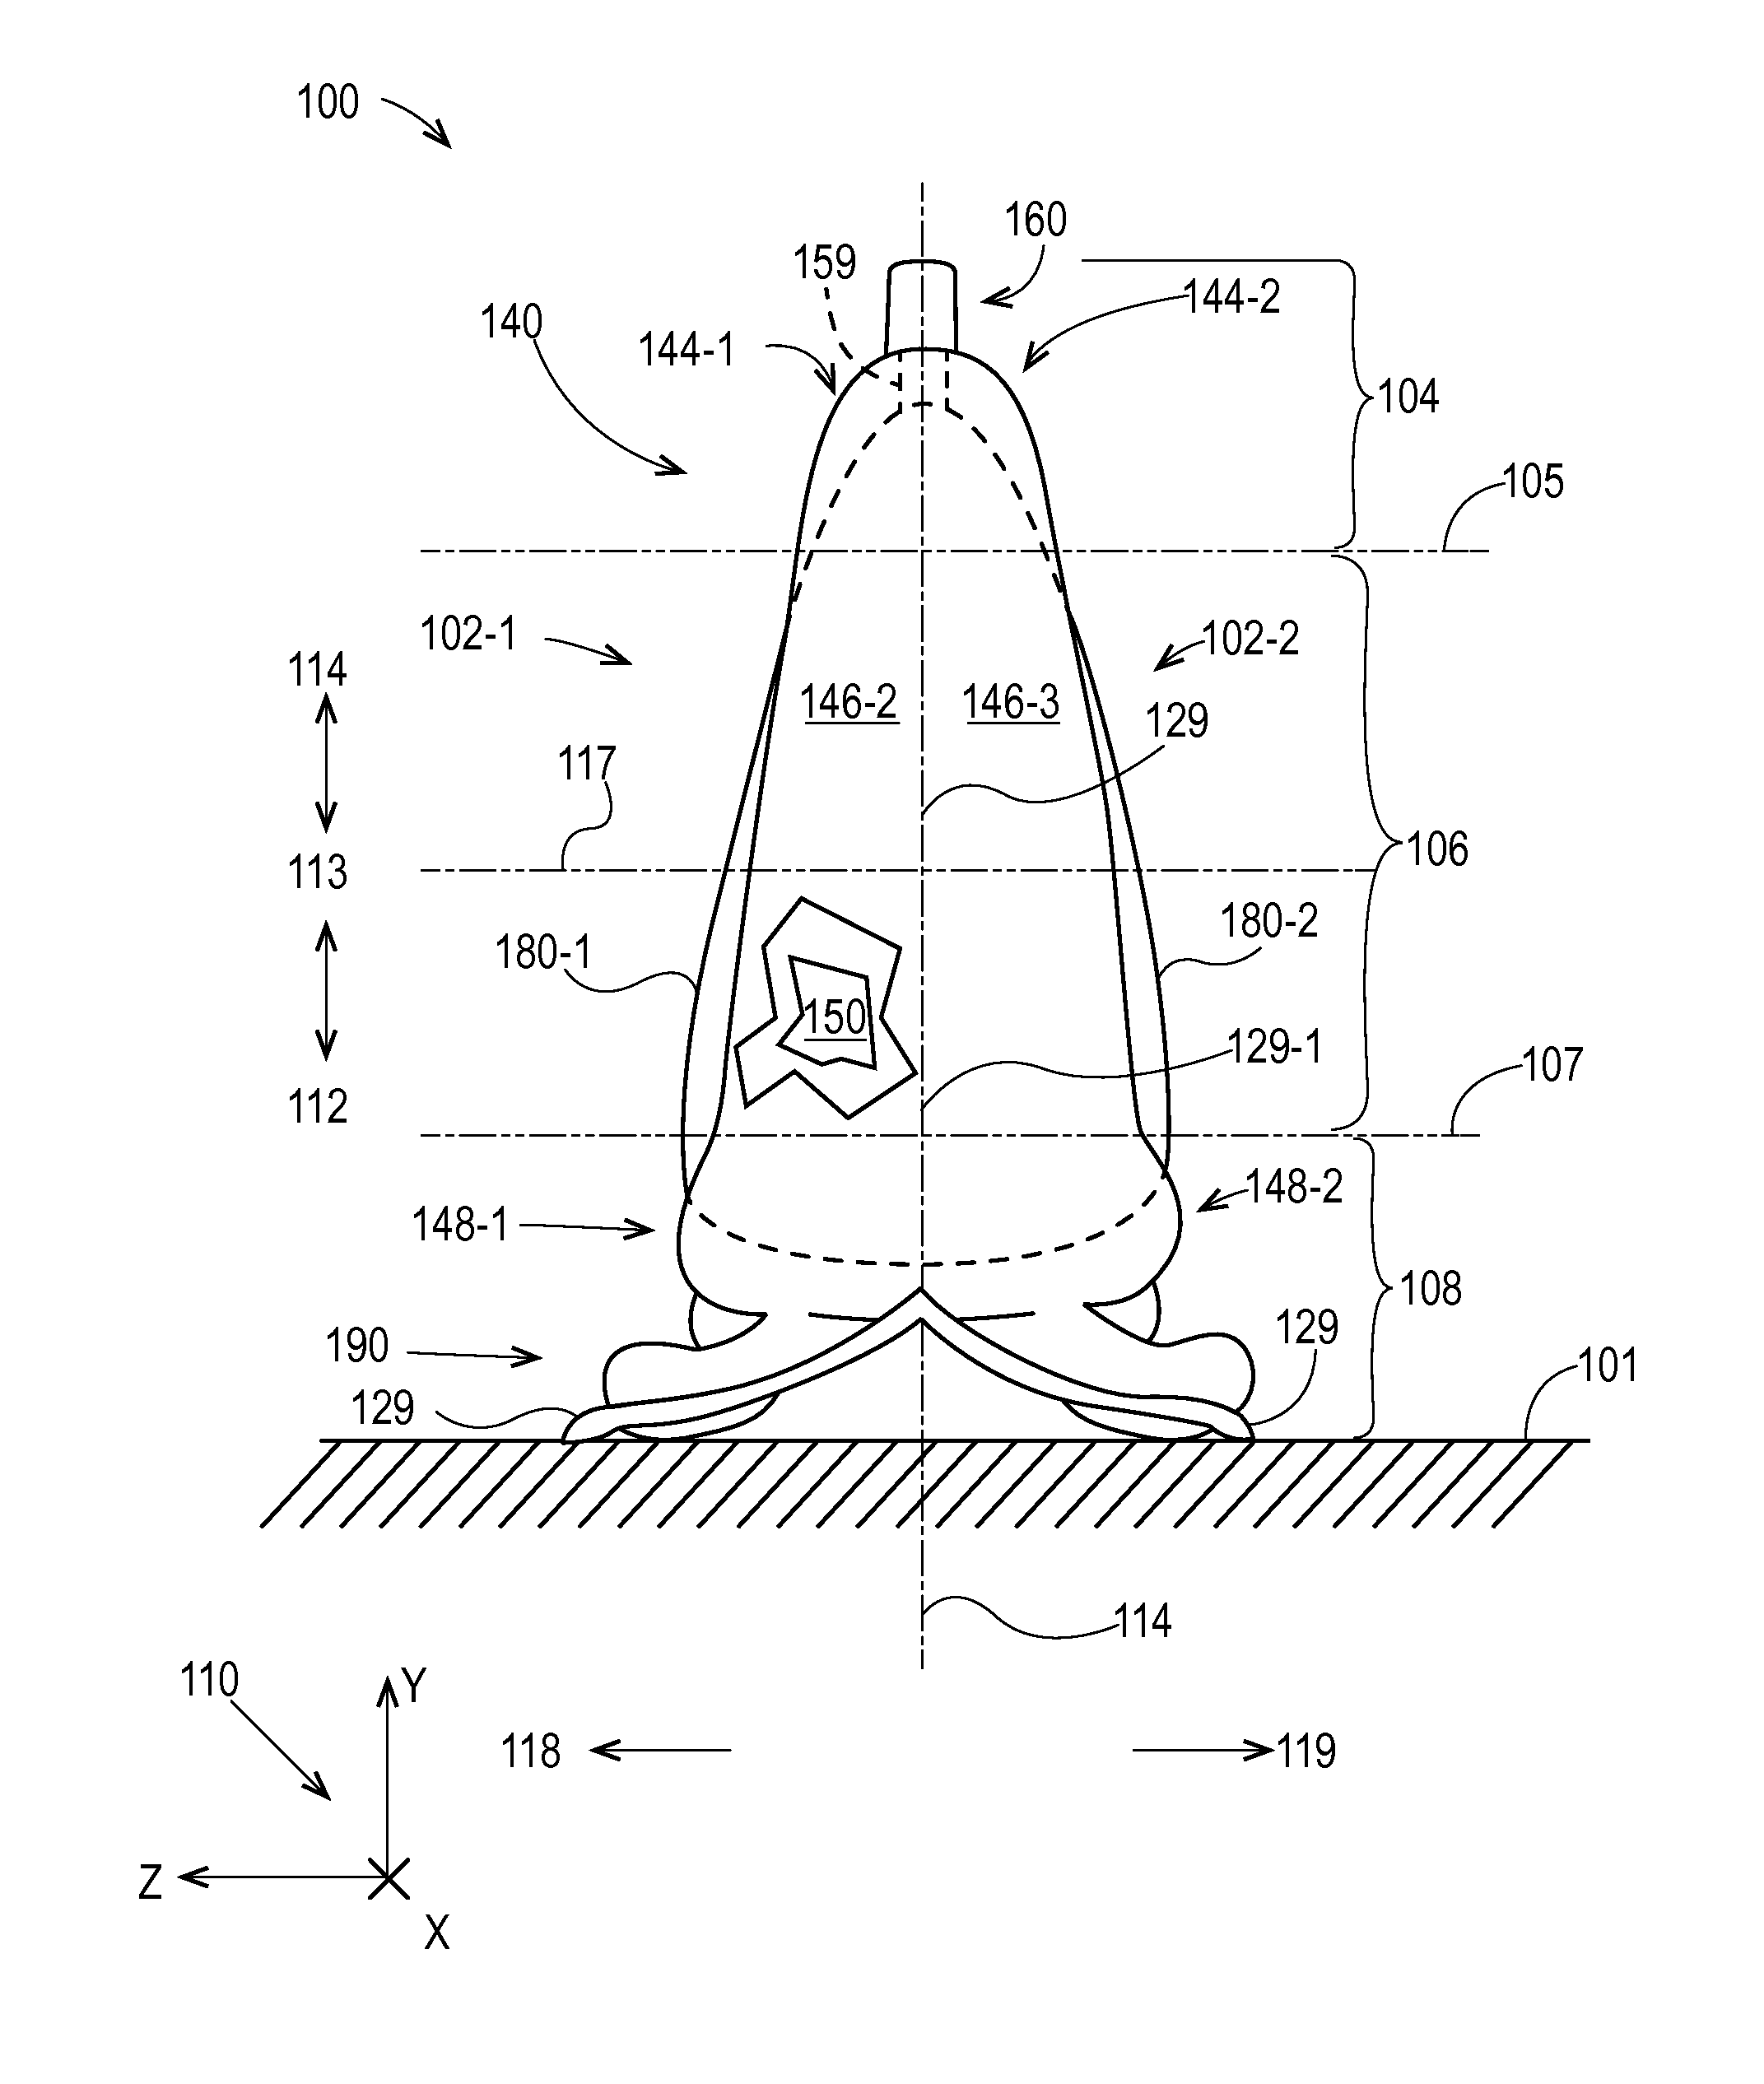 Disposable flexible containers having surface elements